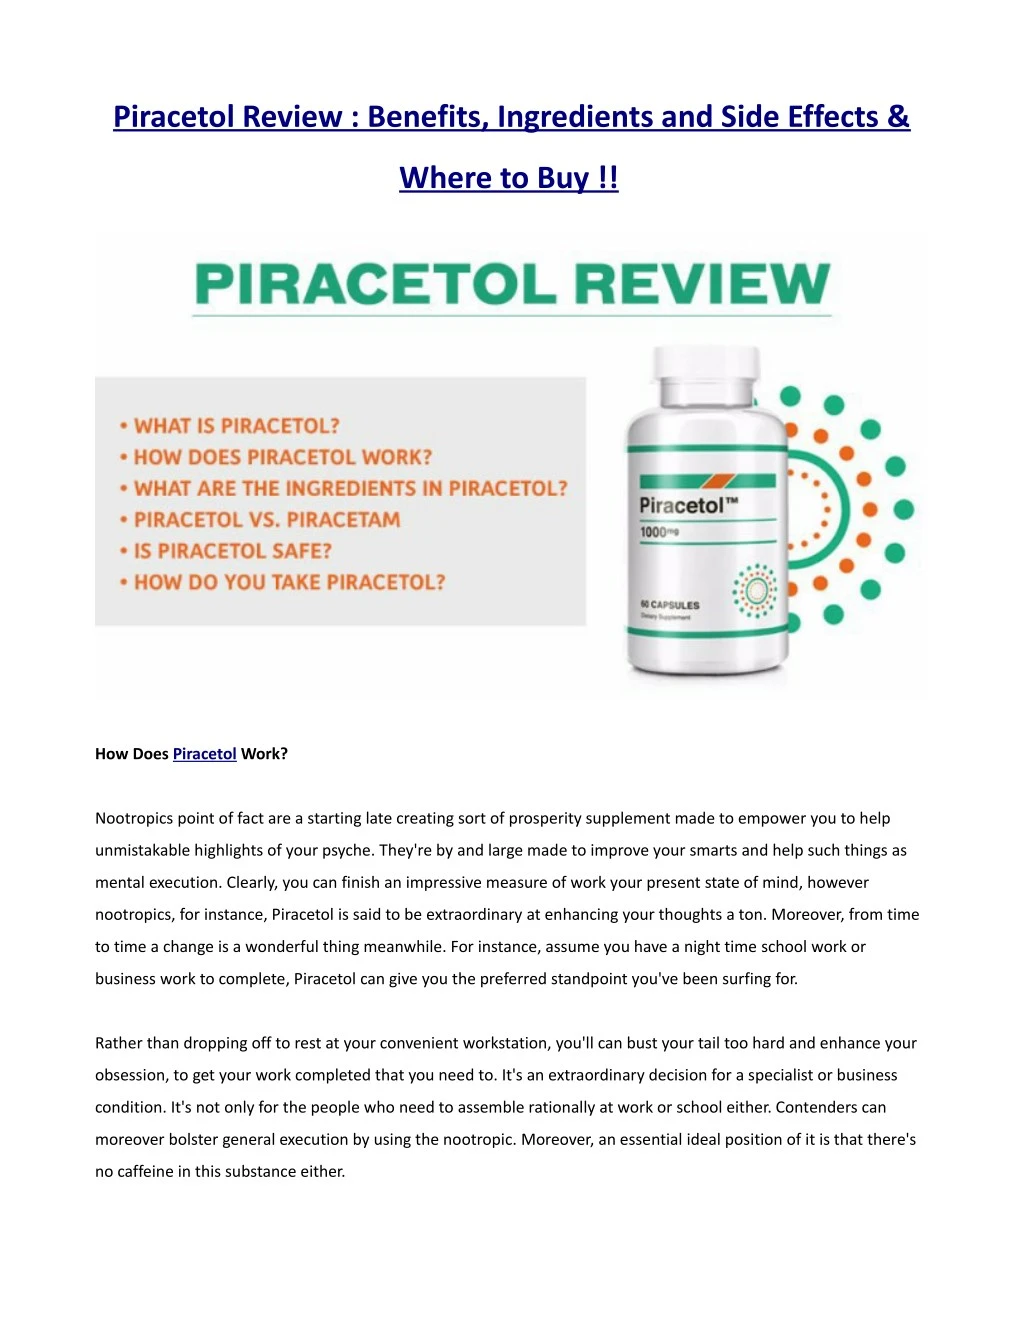 piracetol review benefits ingredients and side